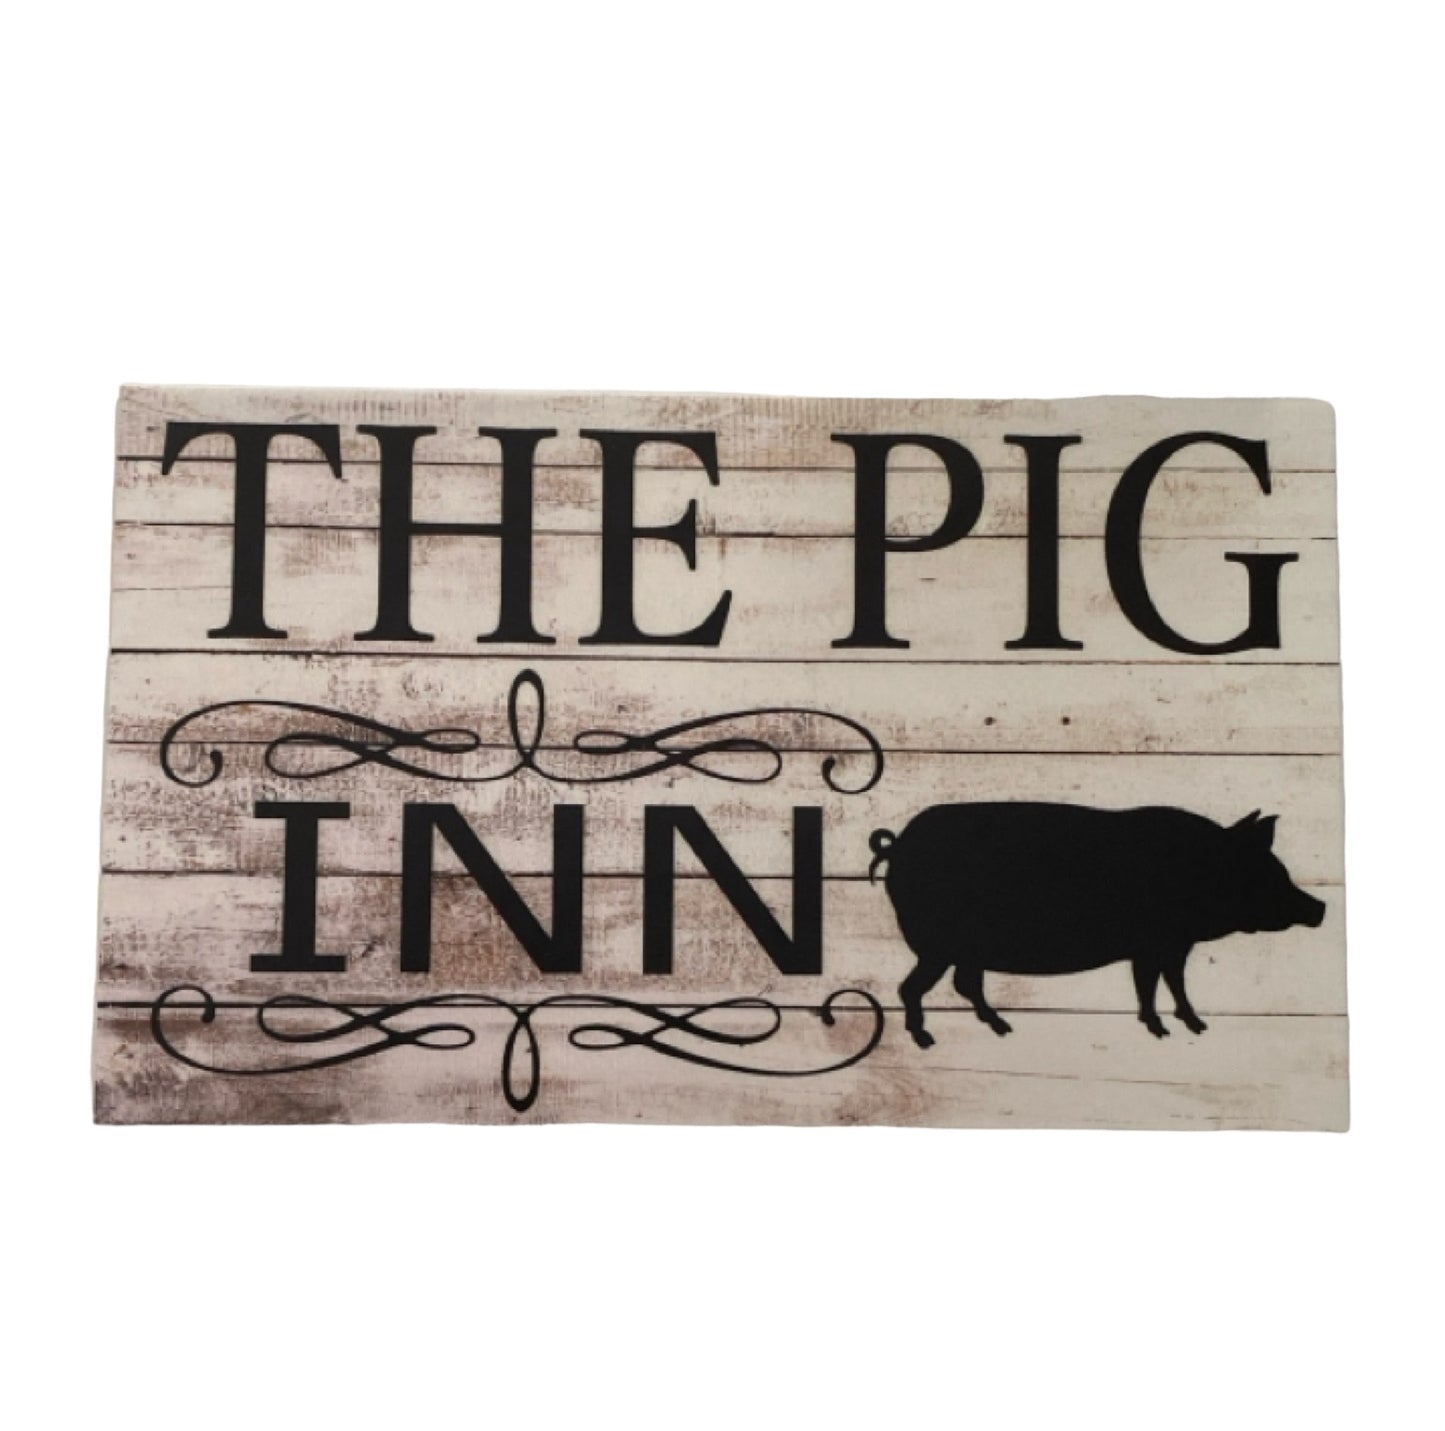 The Pig Inn Farm Gate Pen House Sign - The Renmy Store Homewares & Gifts 